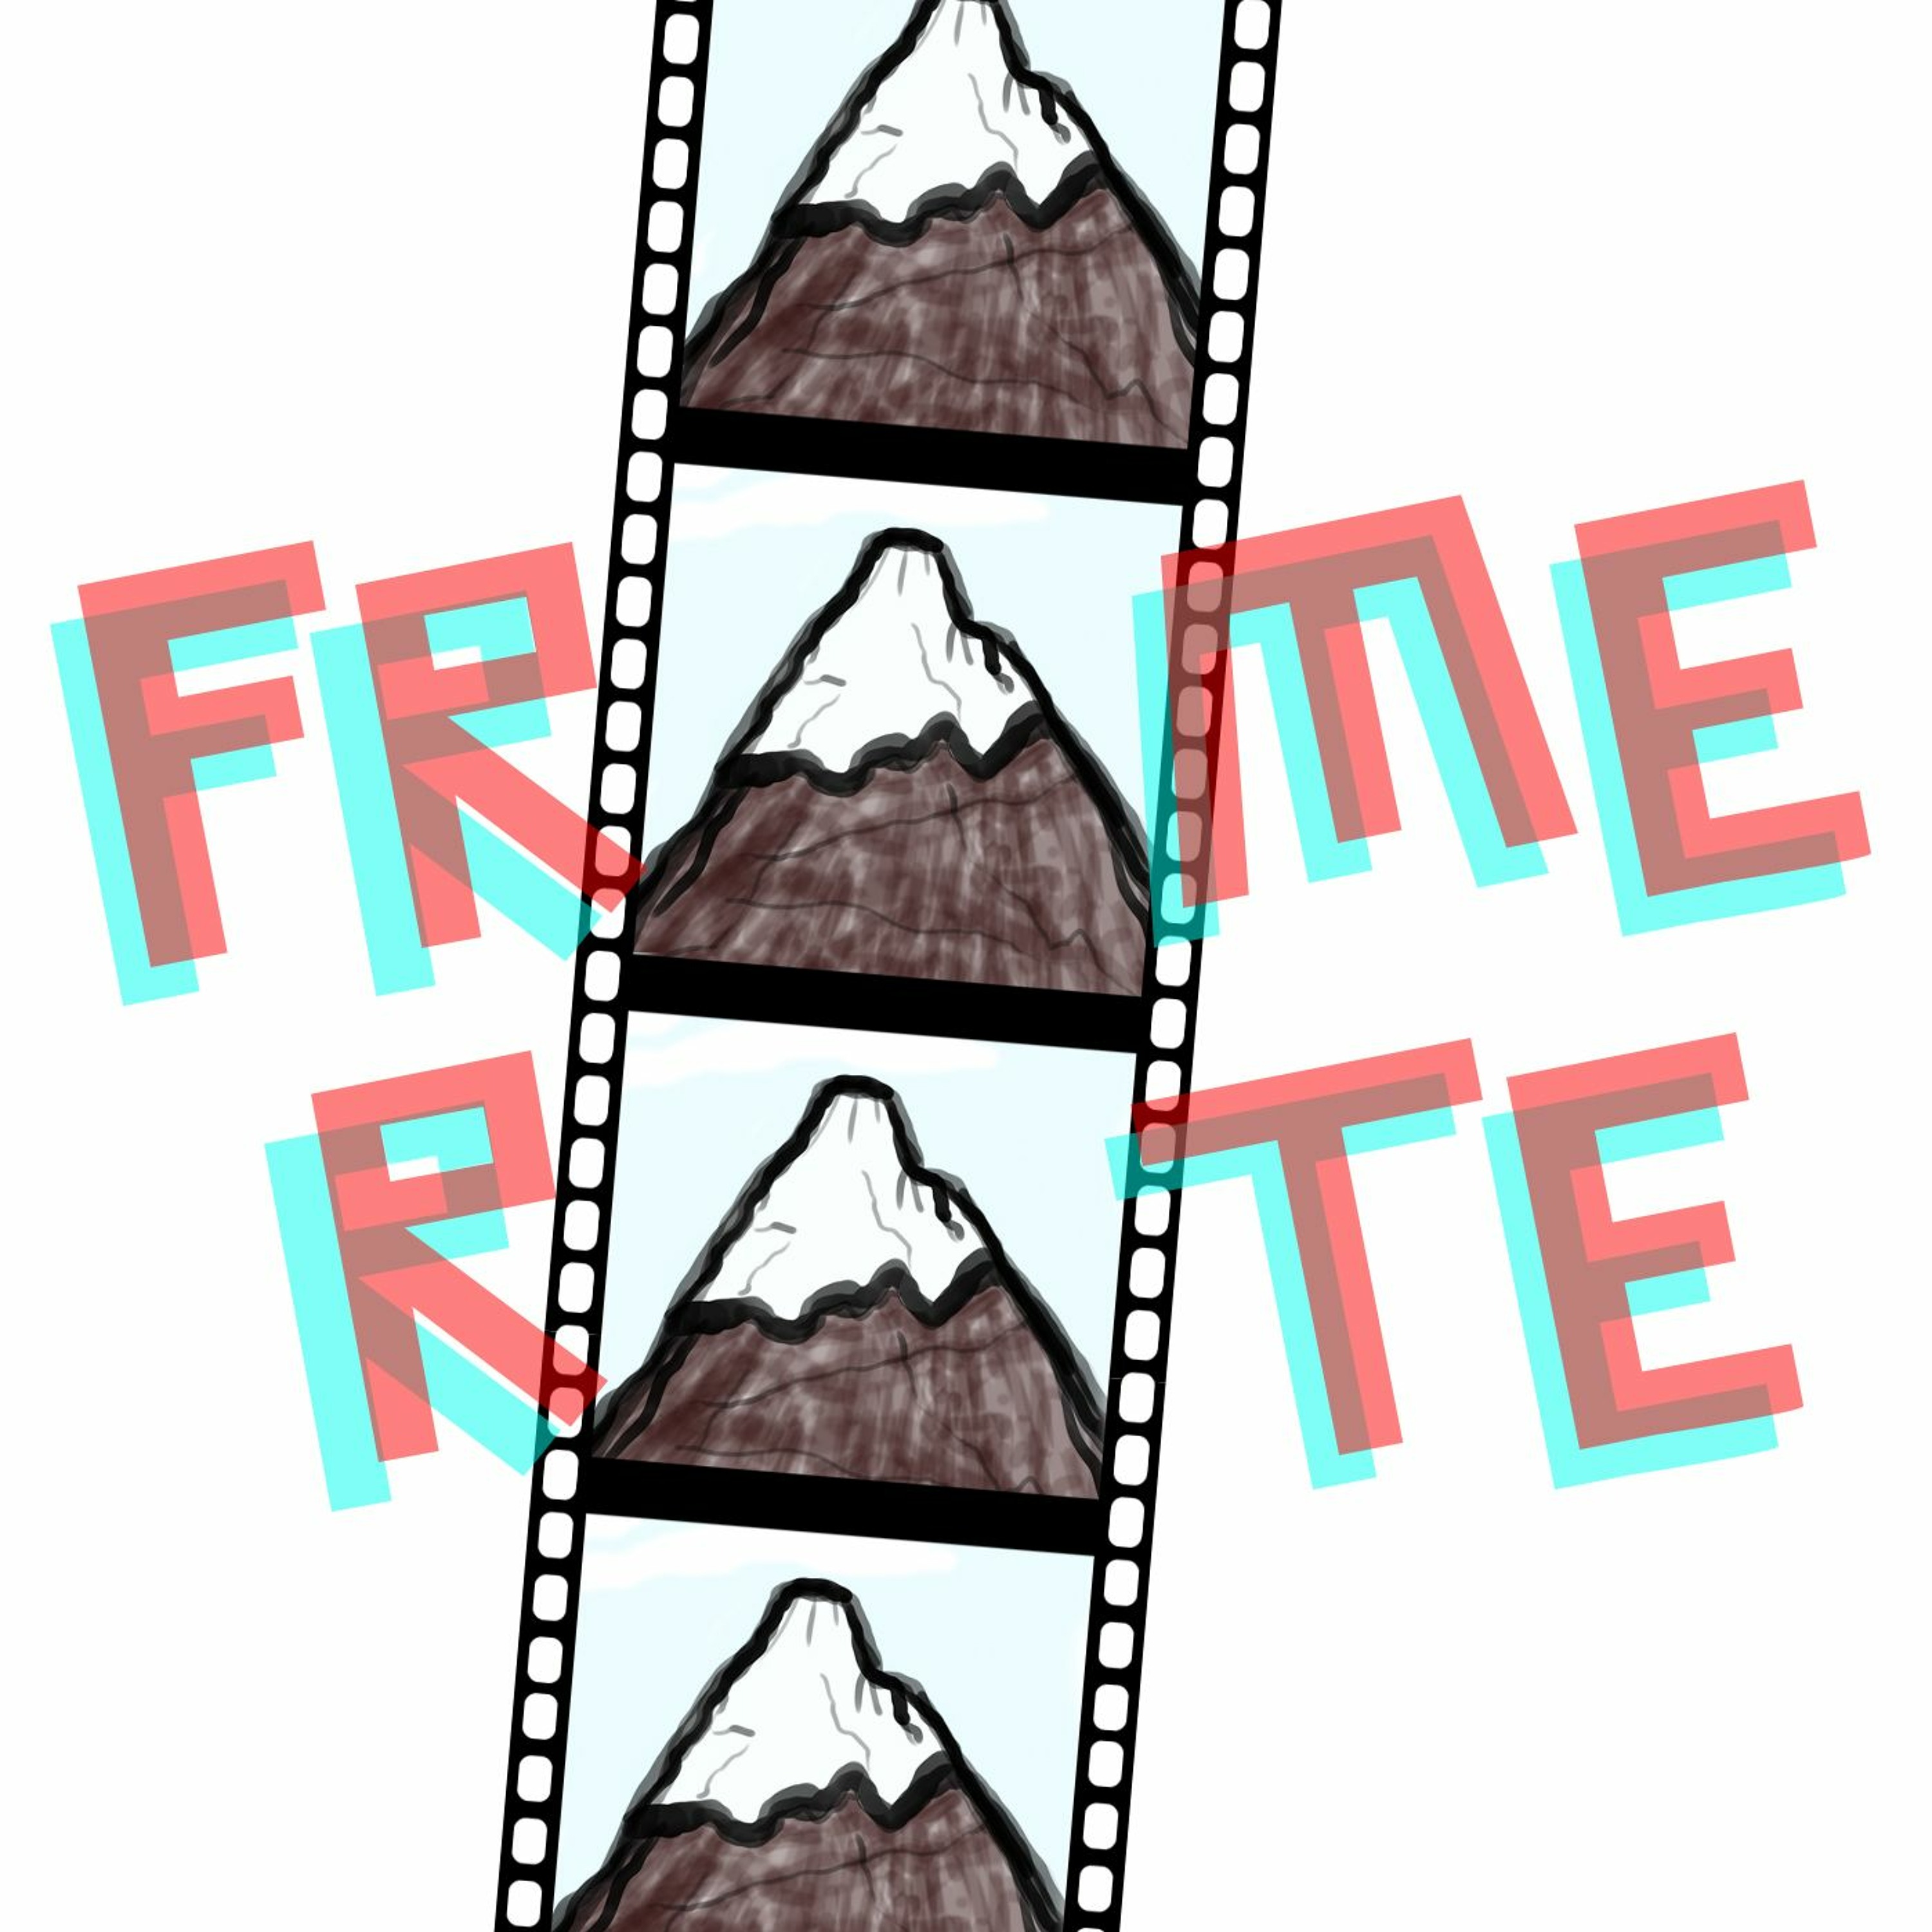 225. Frame Rate: Boyz n the Hood (Feat. Jacquis Neal)